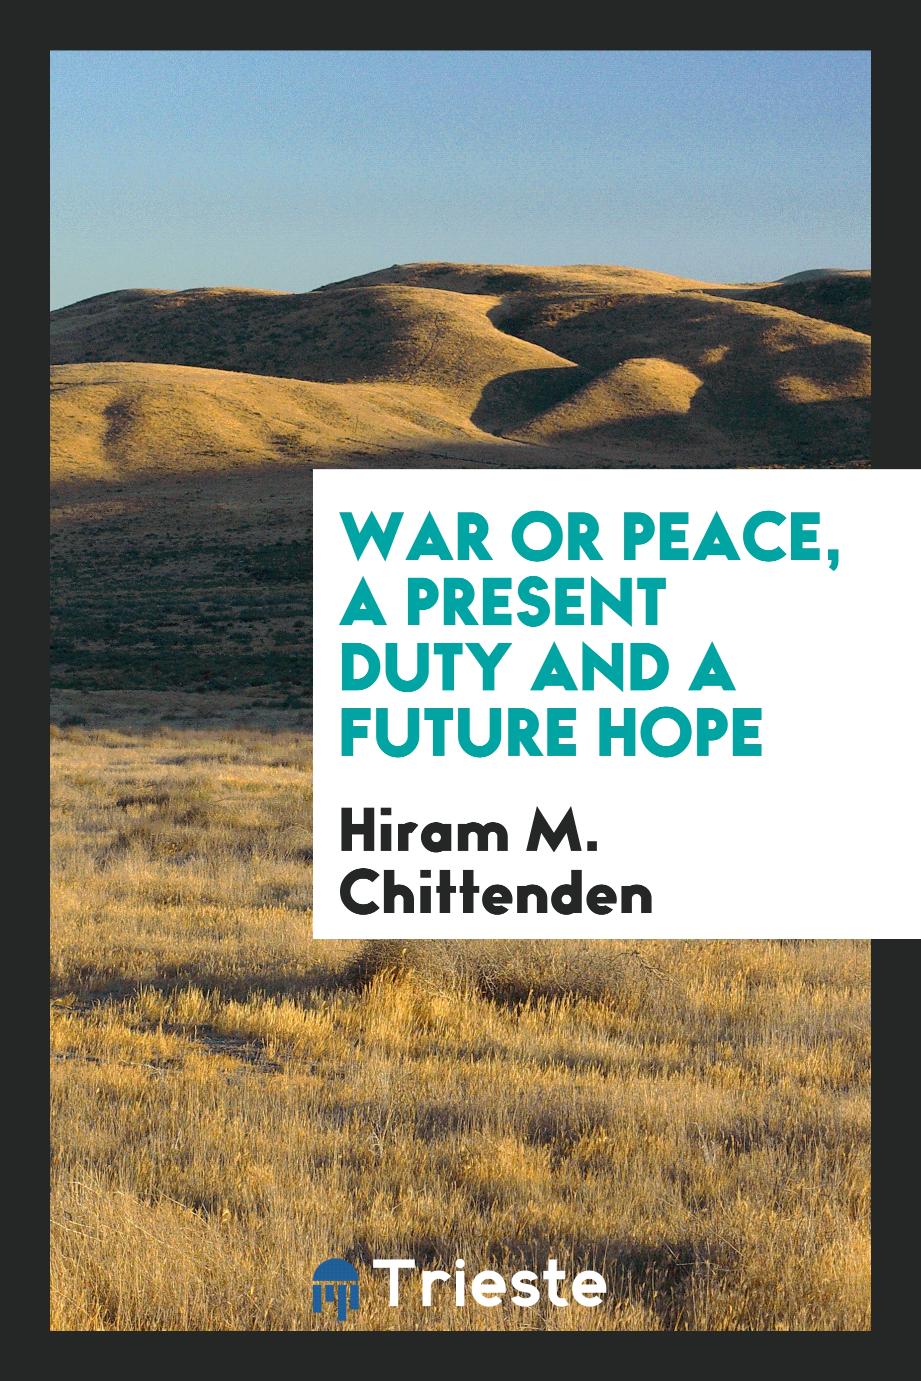 War or peace, a present duty and a future hope